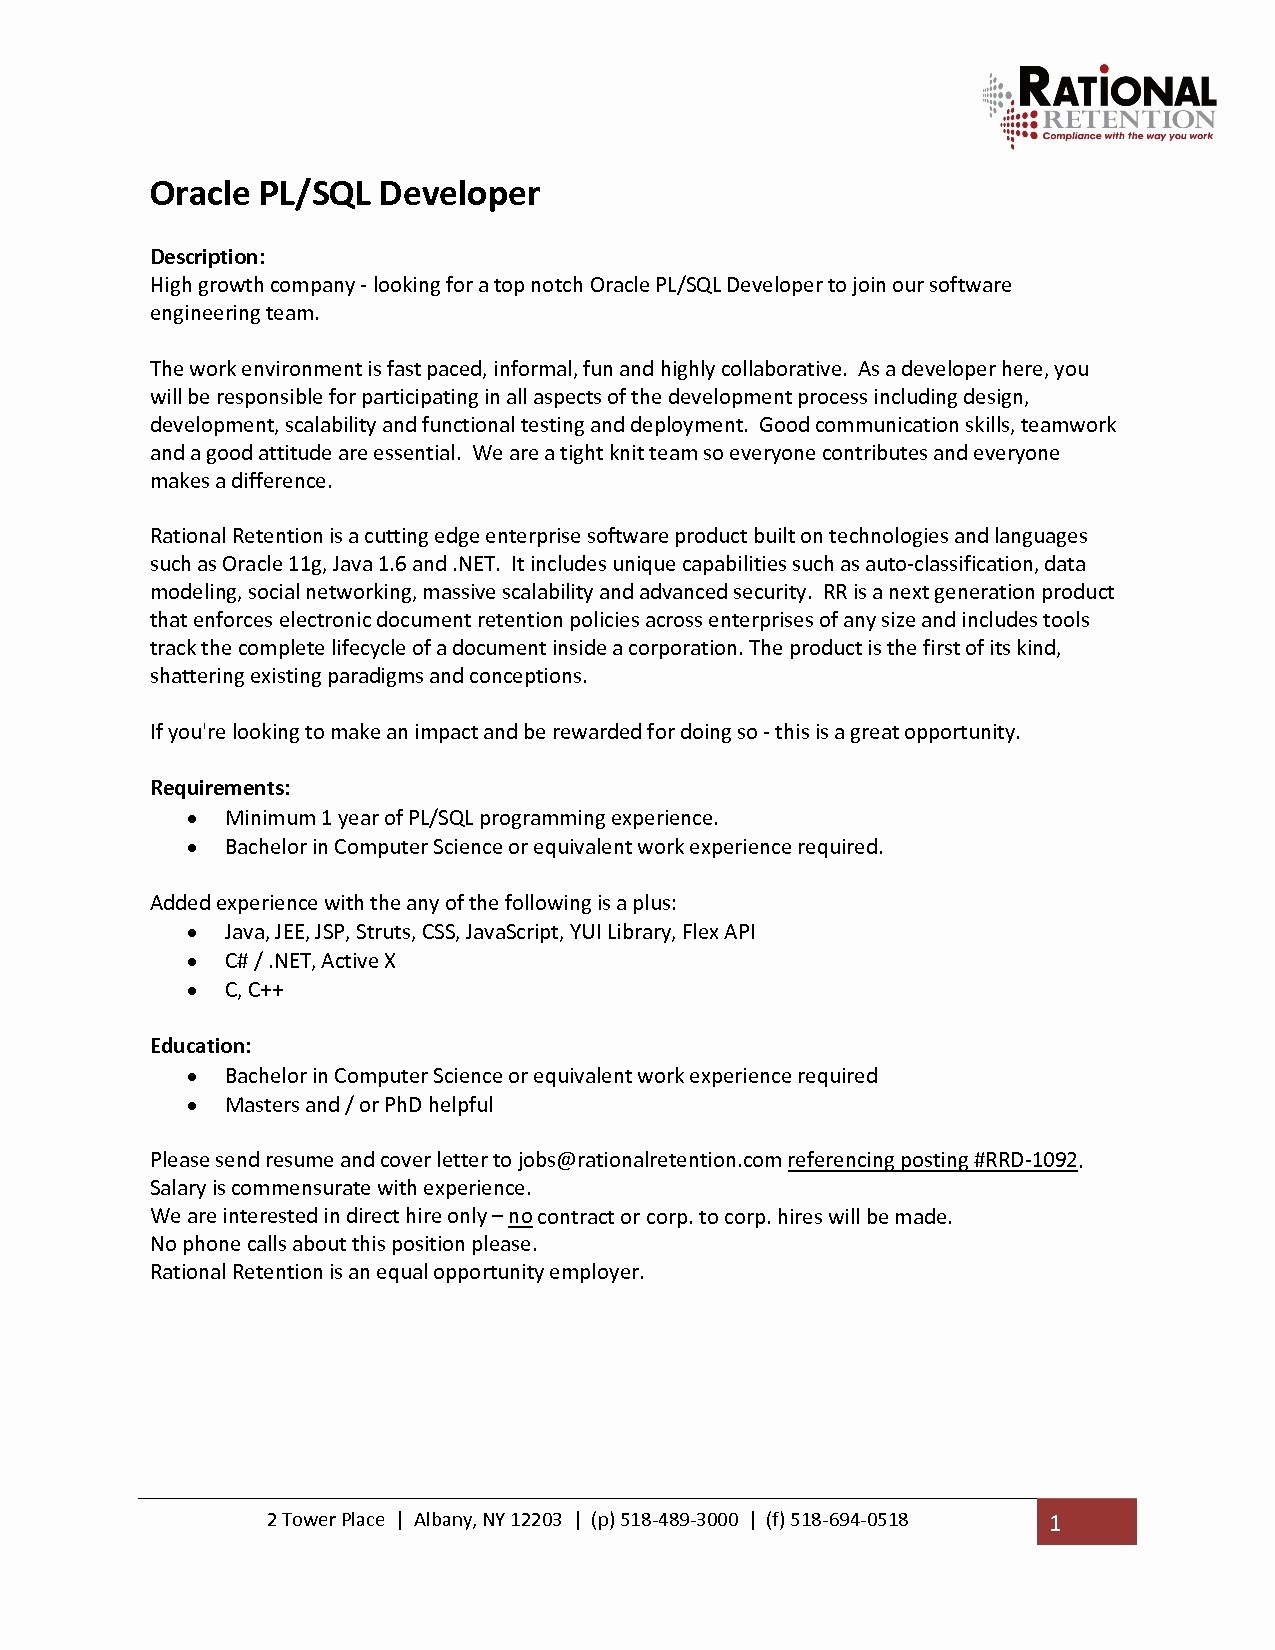 1 Year Experience Resume Format For Software Developer from mthomearts.com